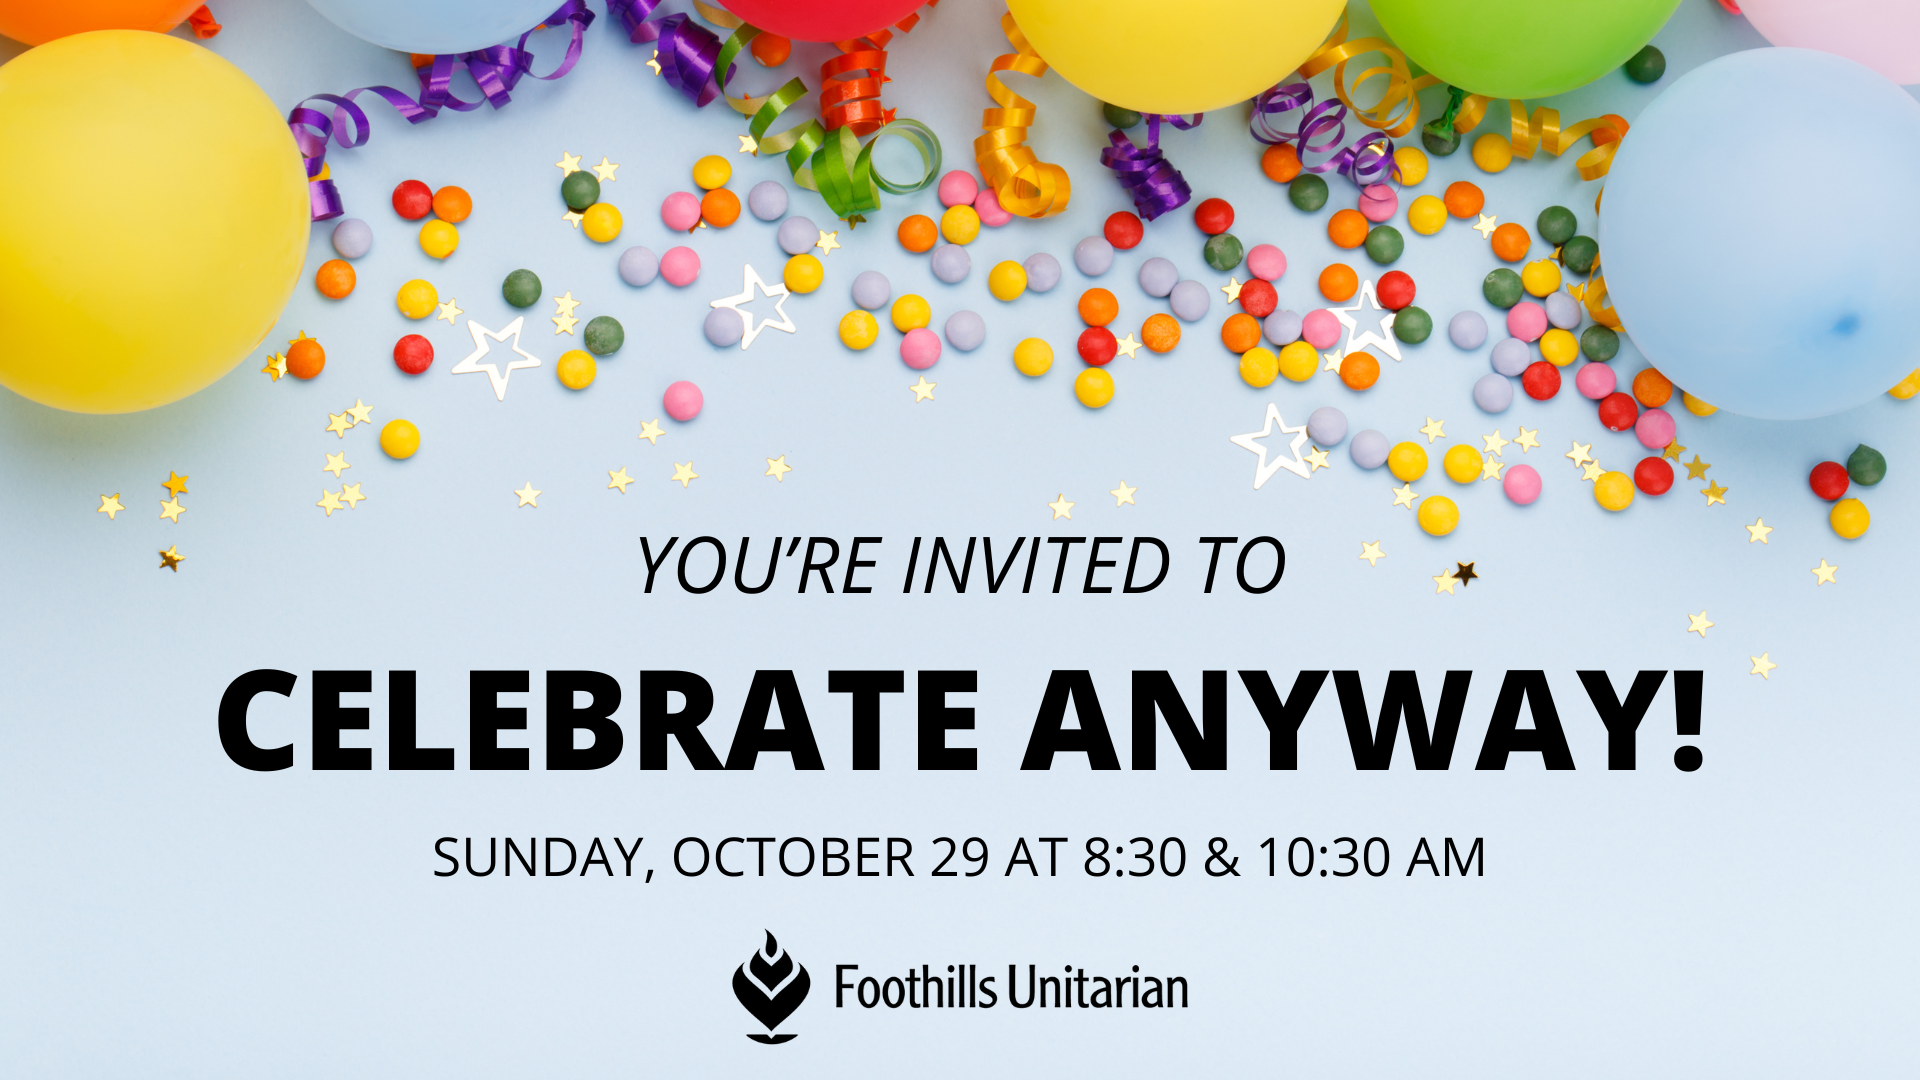 You’re Invited to Celebrate Anyway!